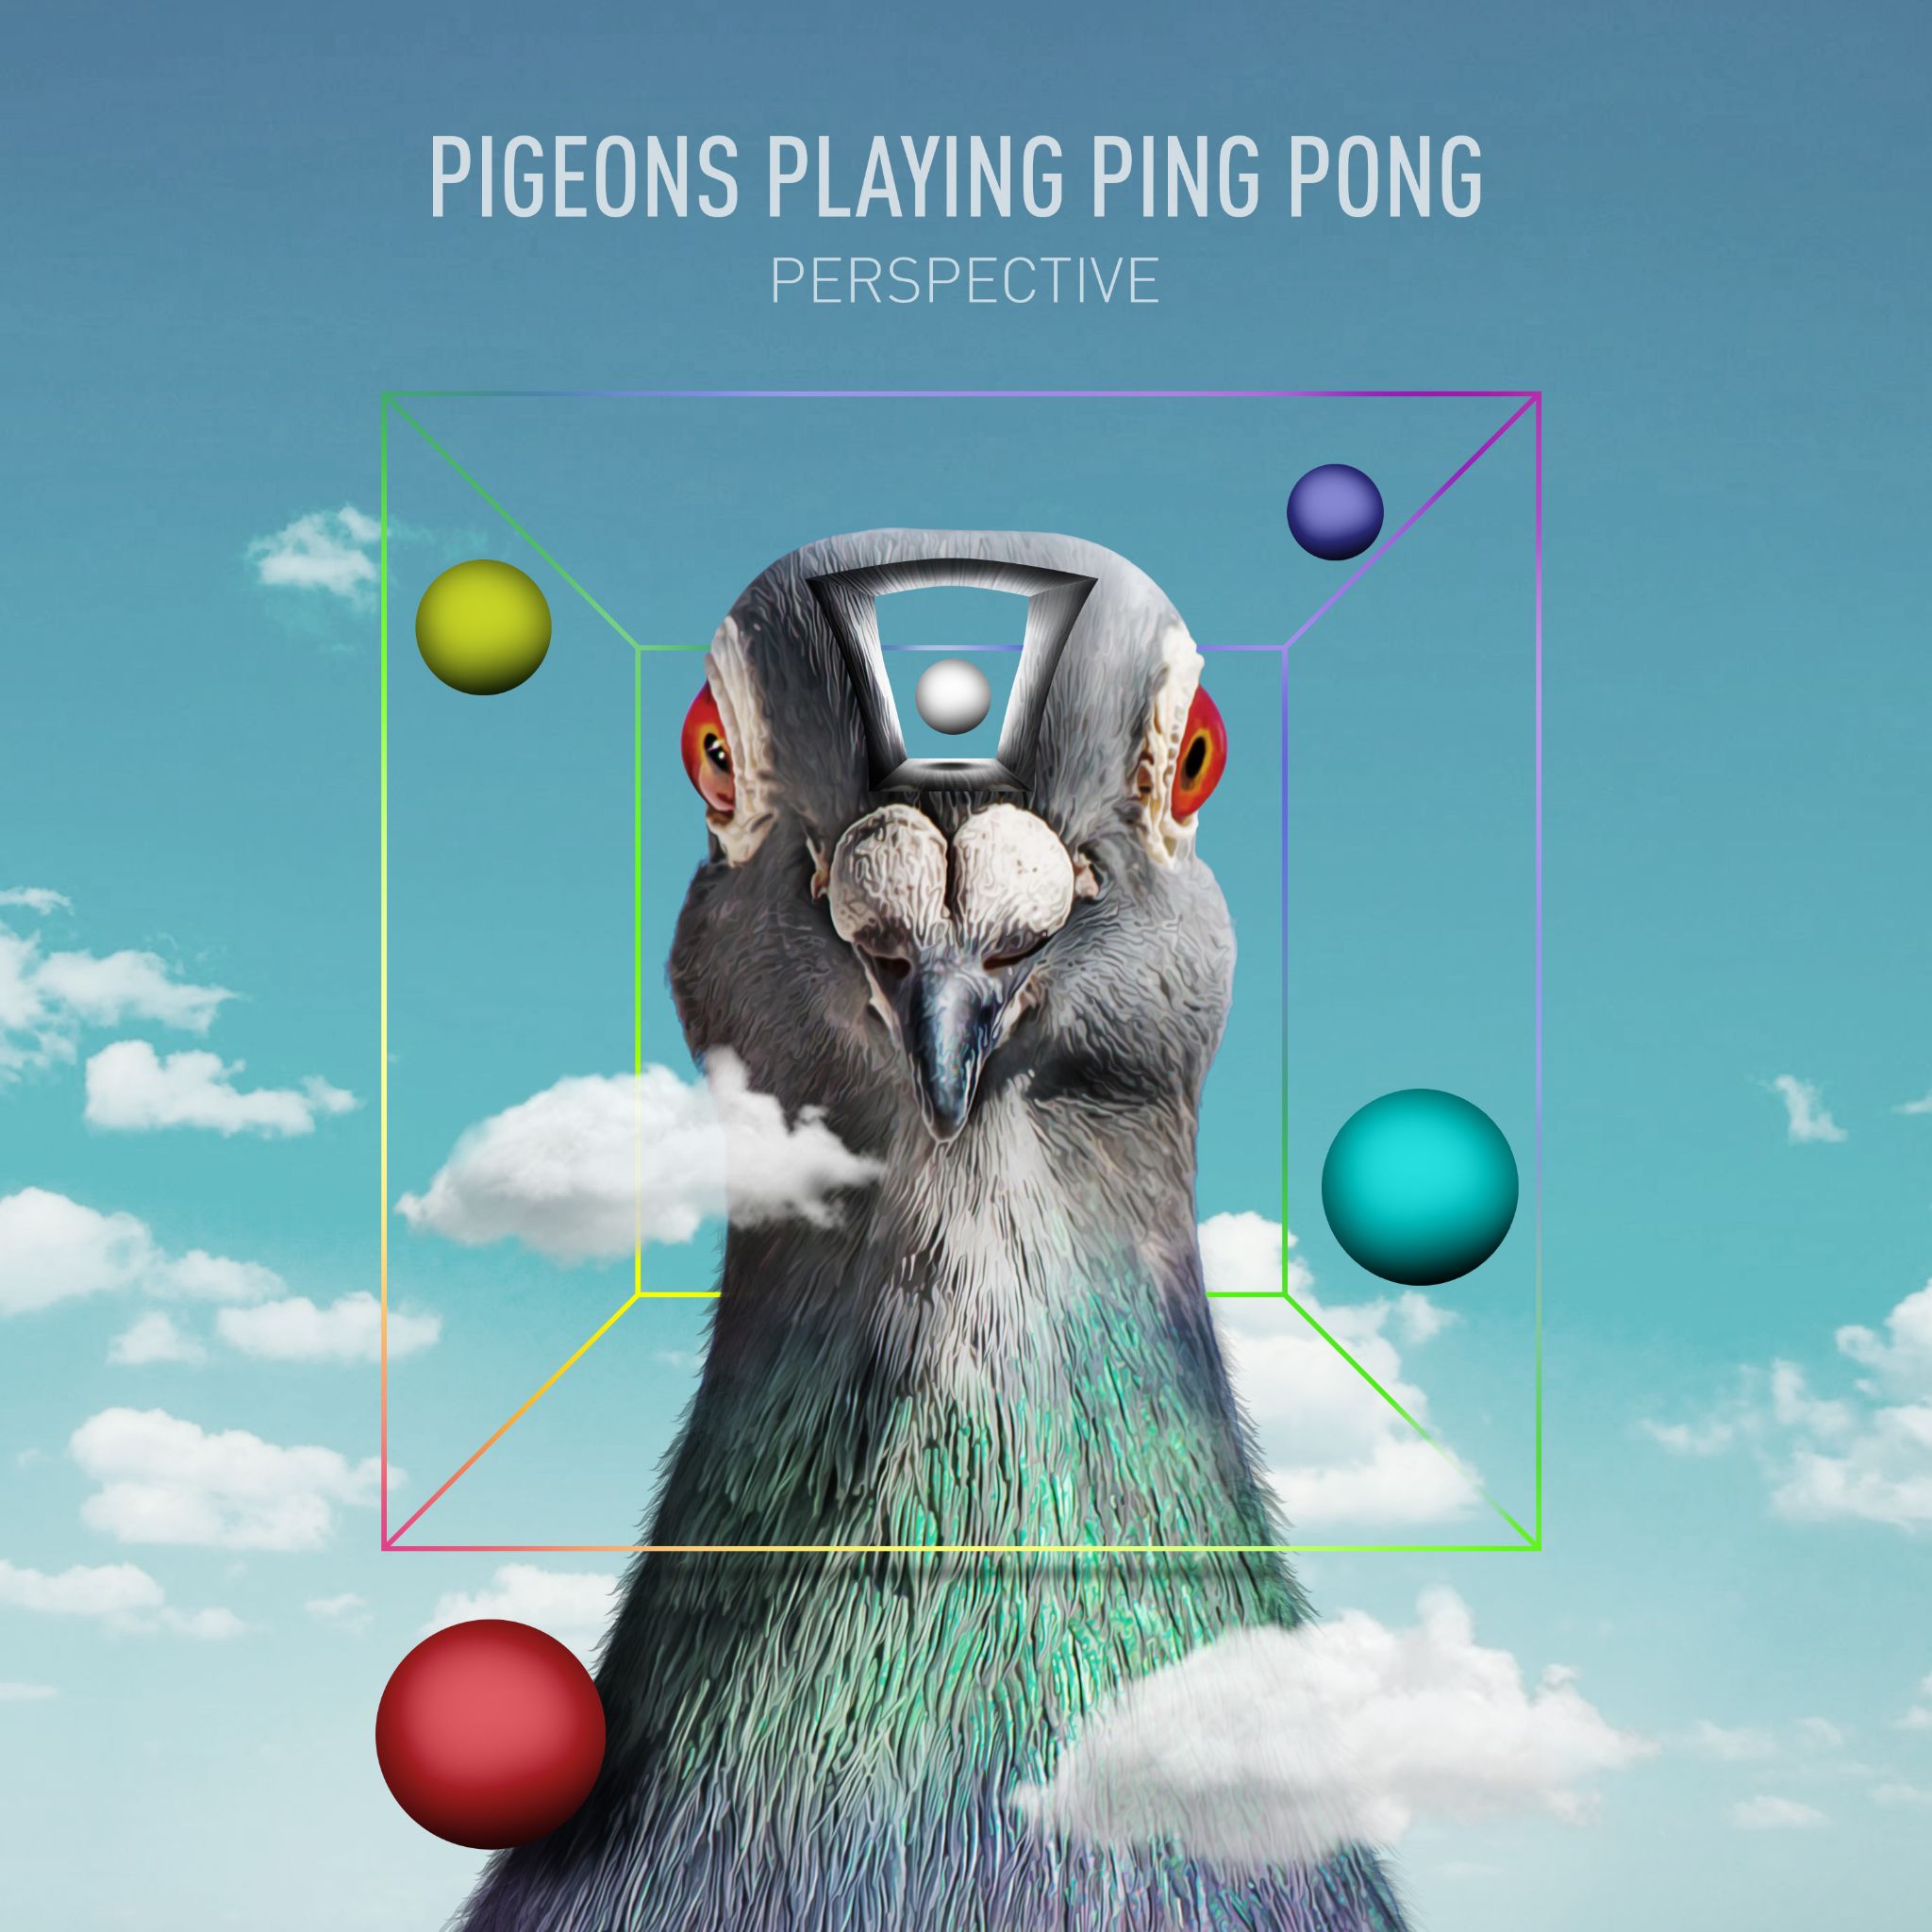 Pigeons Playing Ping Pong Release Perspective; Highly Anticipated Sixth Studio Album